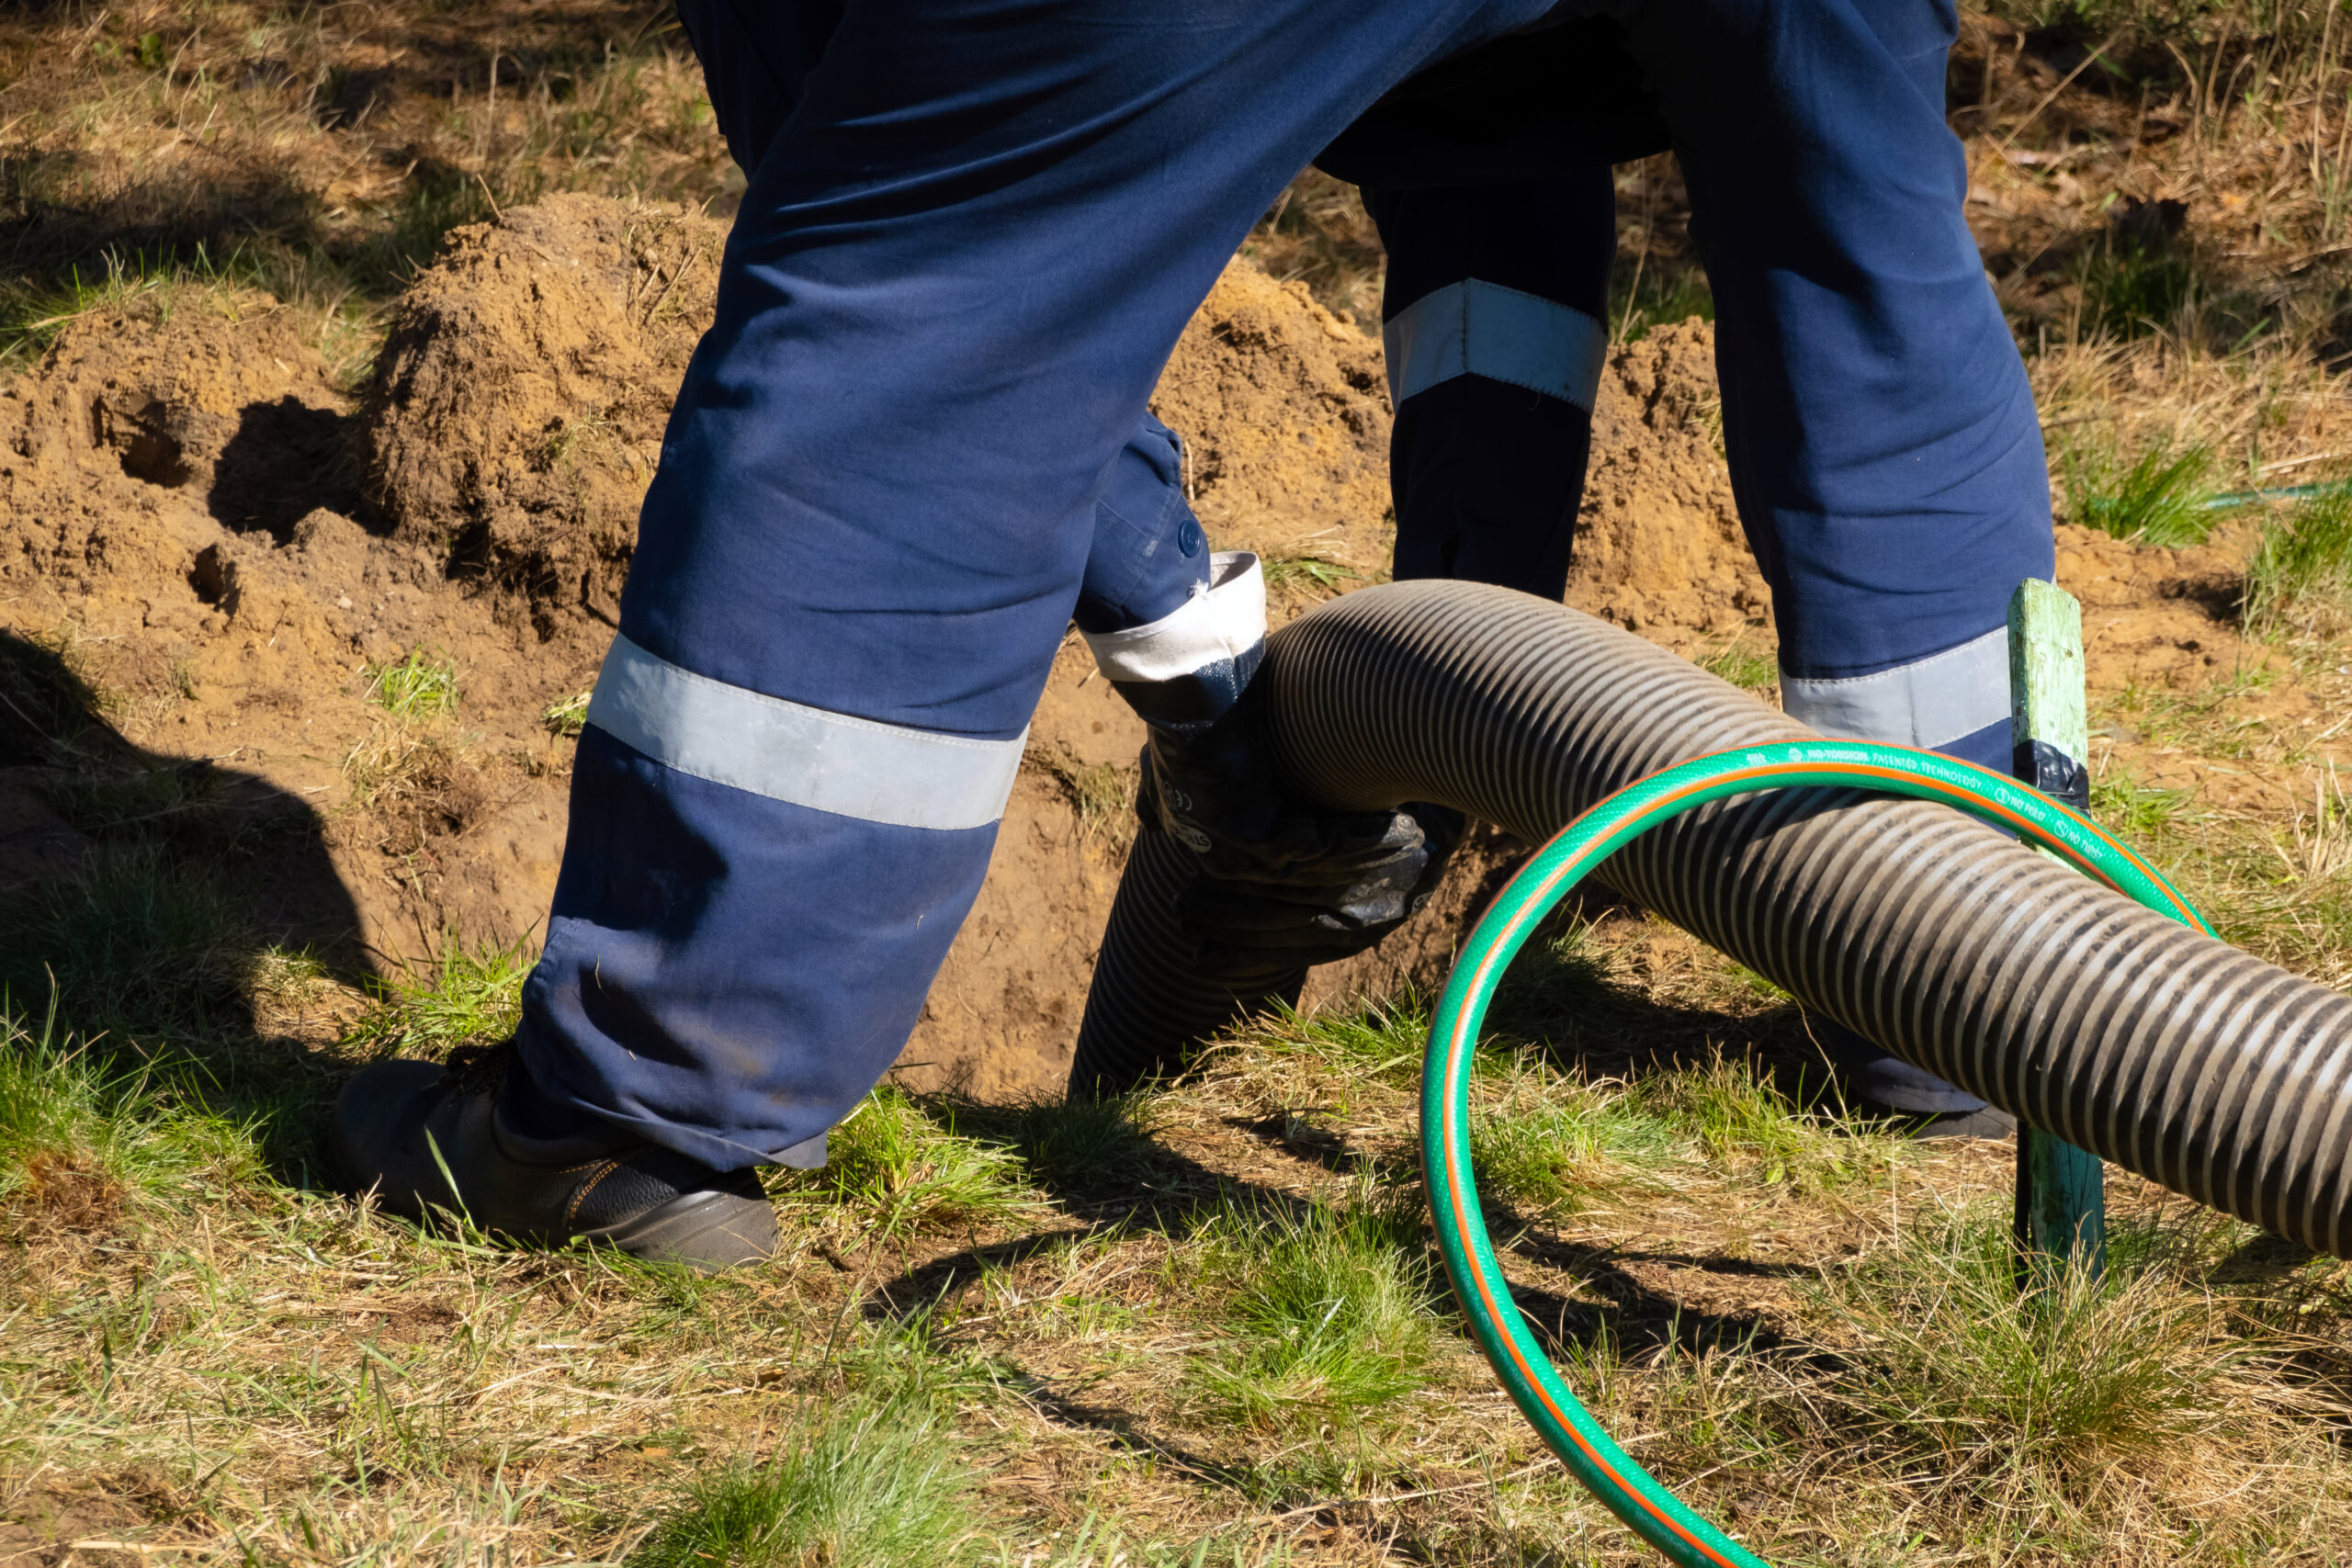 Sewage Line Services in Portland, OR